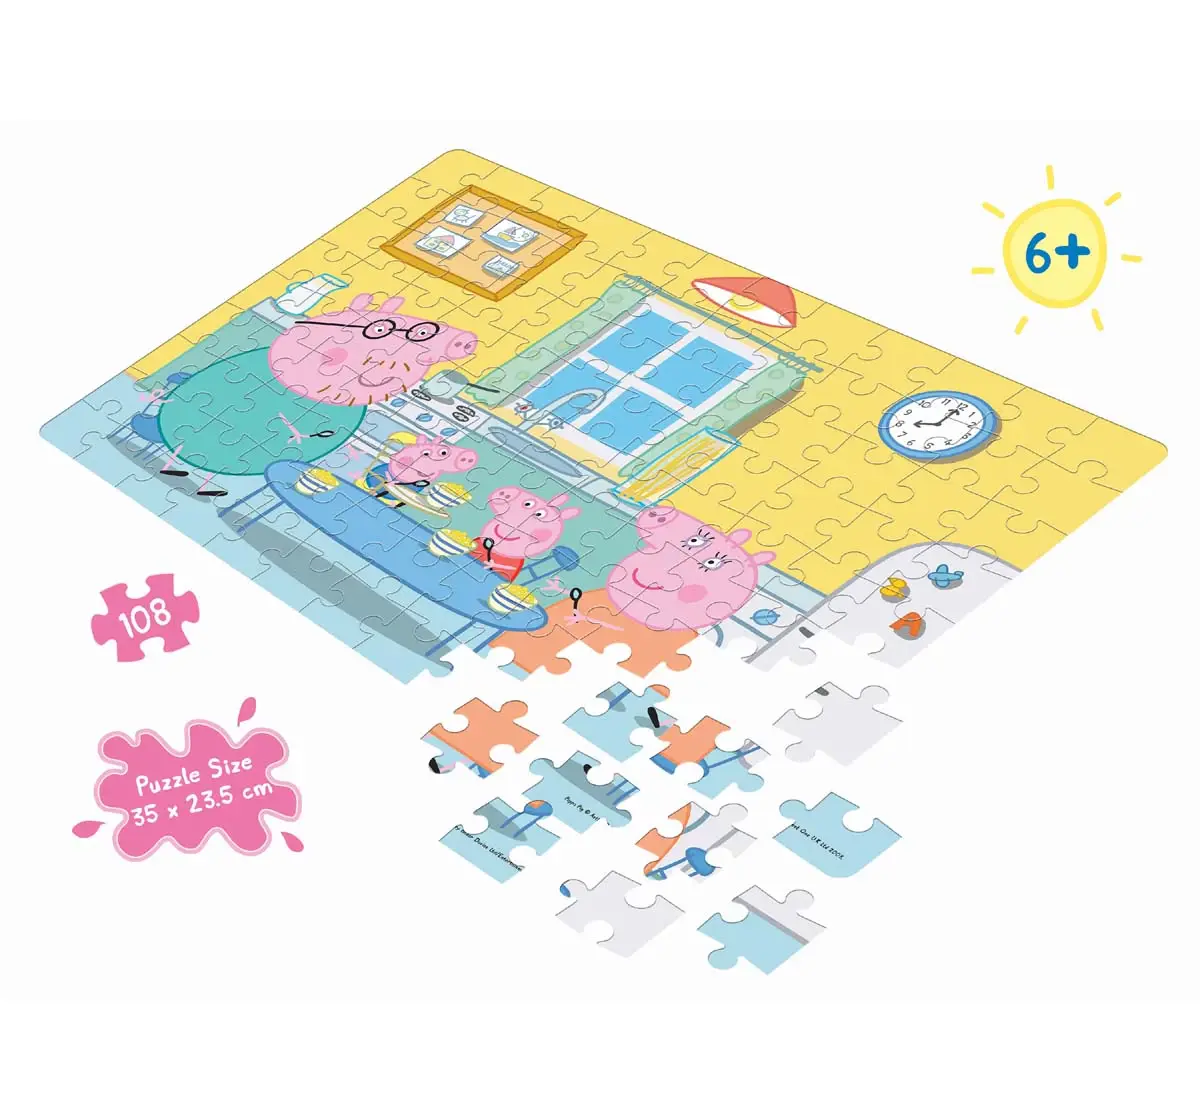 Frank Peppa Pig 108 Pcs Puzzle Puzzles for Kids Age 6Y+